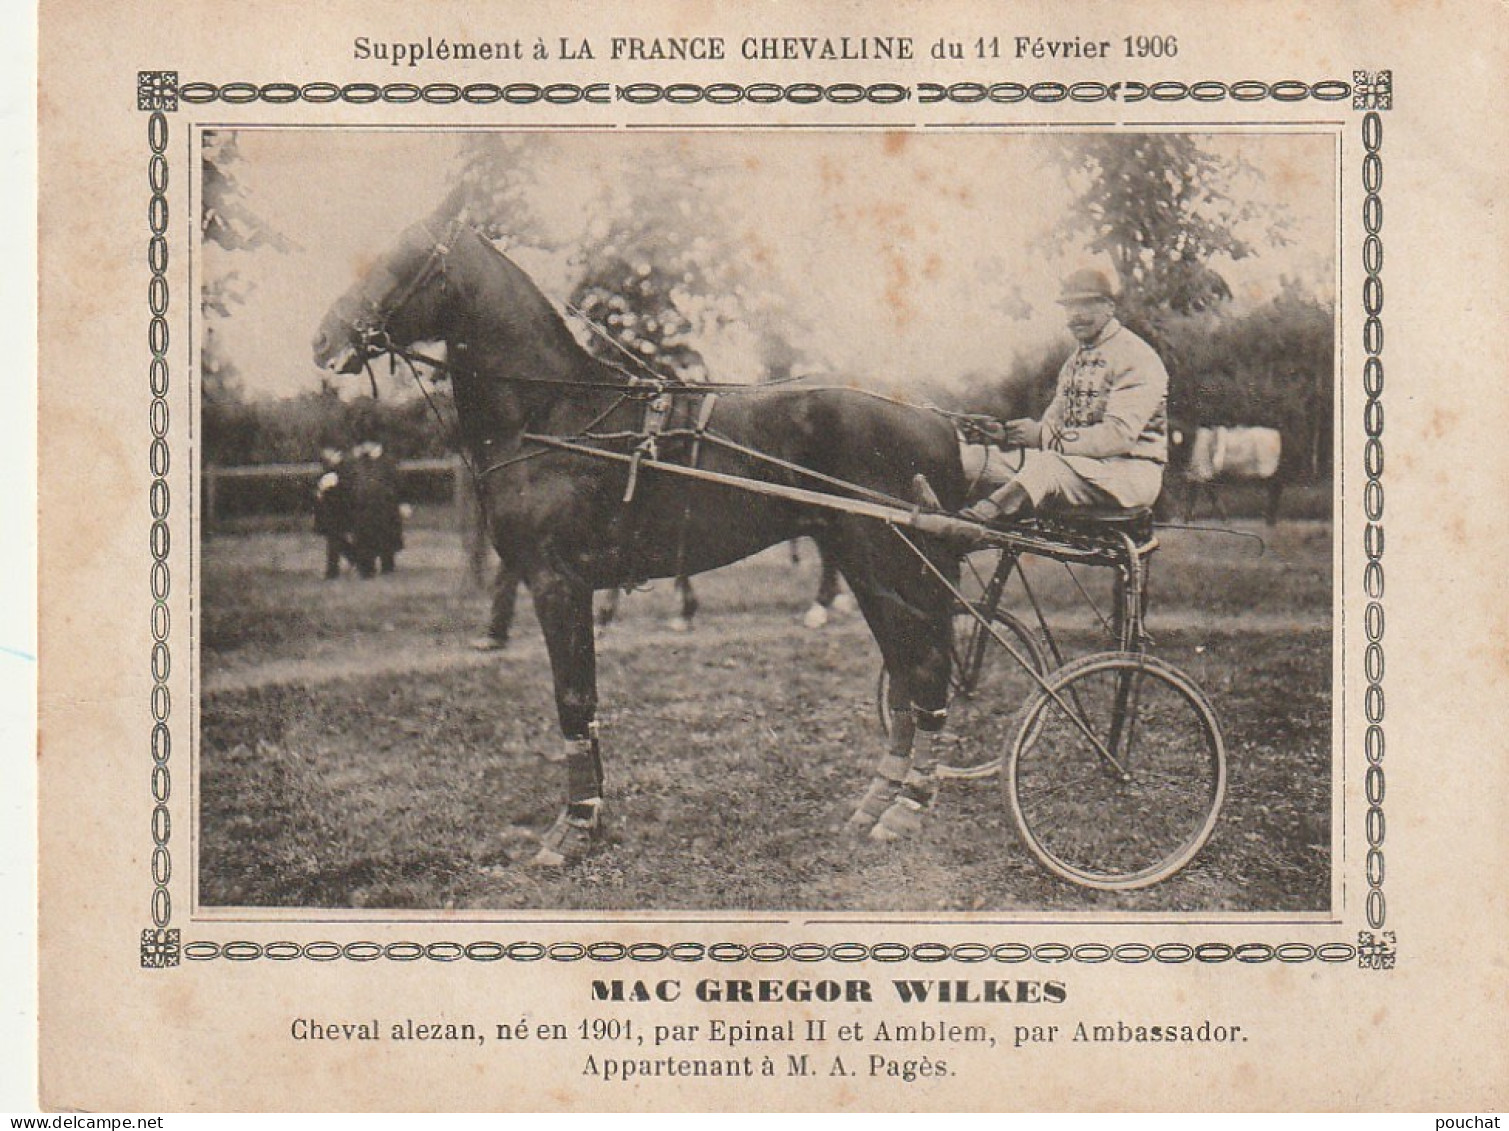 AA+ - " MAC GREGOR WILKES " - CHEVAL ALEZAN APPARTENANT A M. A. PAGES - SUPPL. " FRANCE CHEVALINE " , FEV. 1906 - SULKY - Reitsport